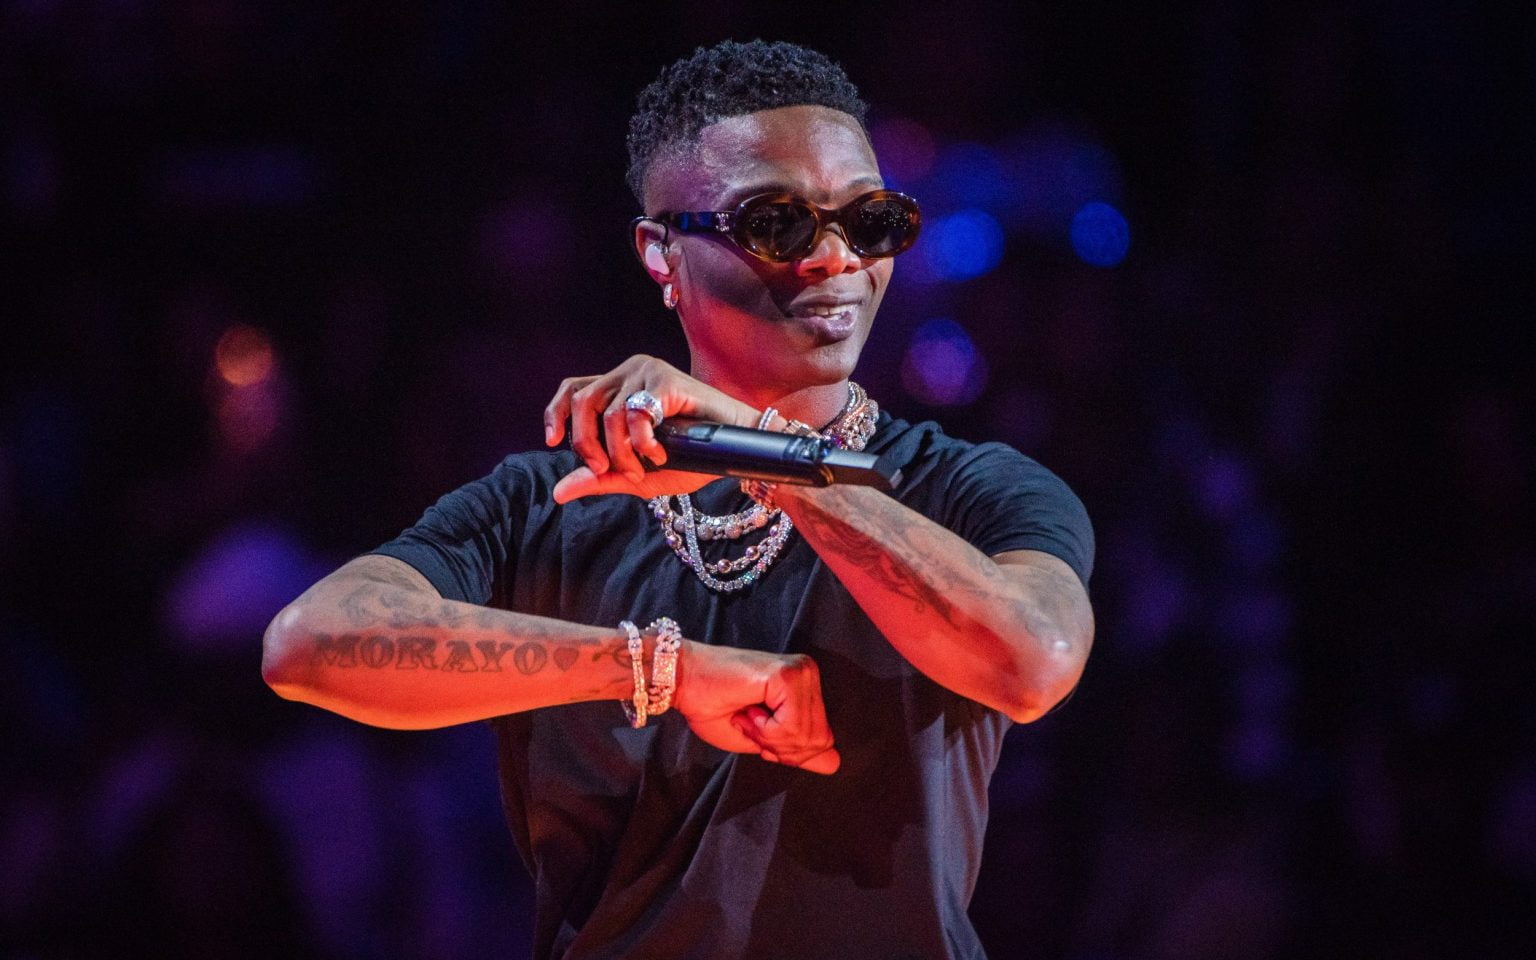 ‘I got enough music to retire’ – Wizkid says on 33rd birthday